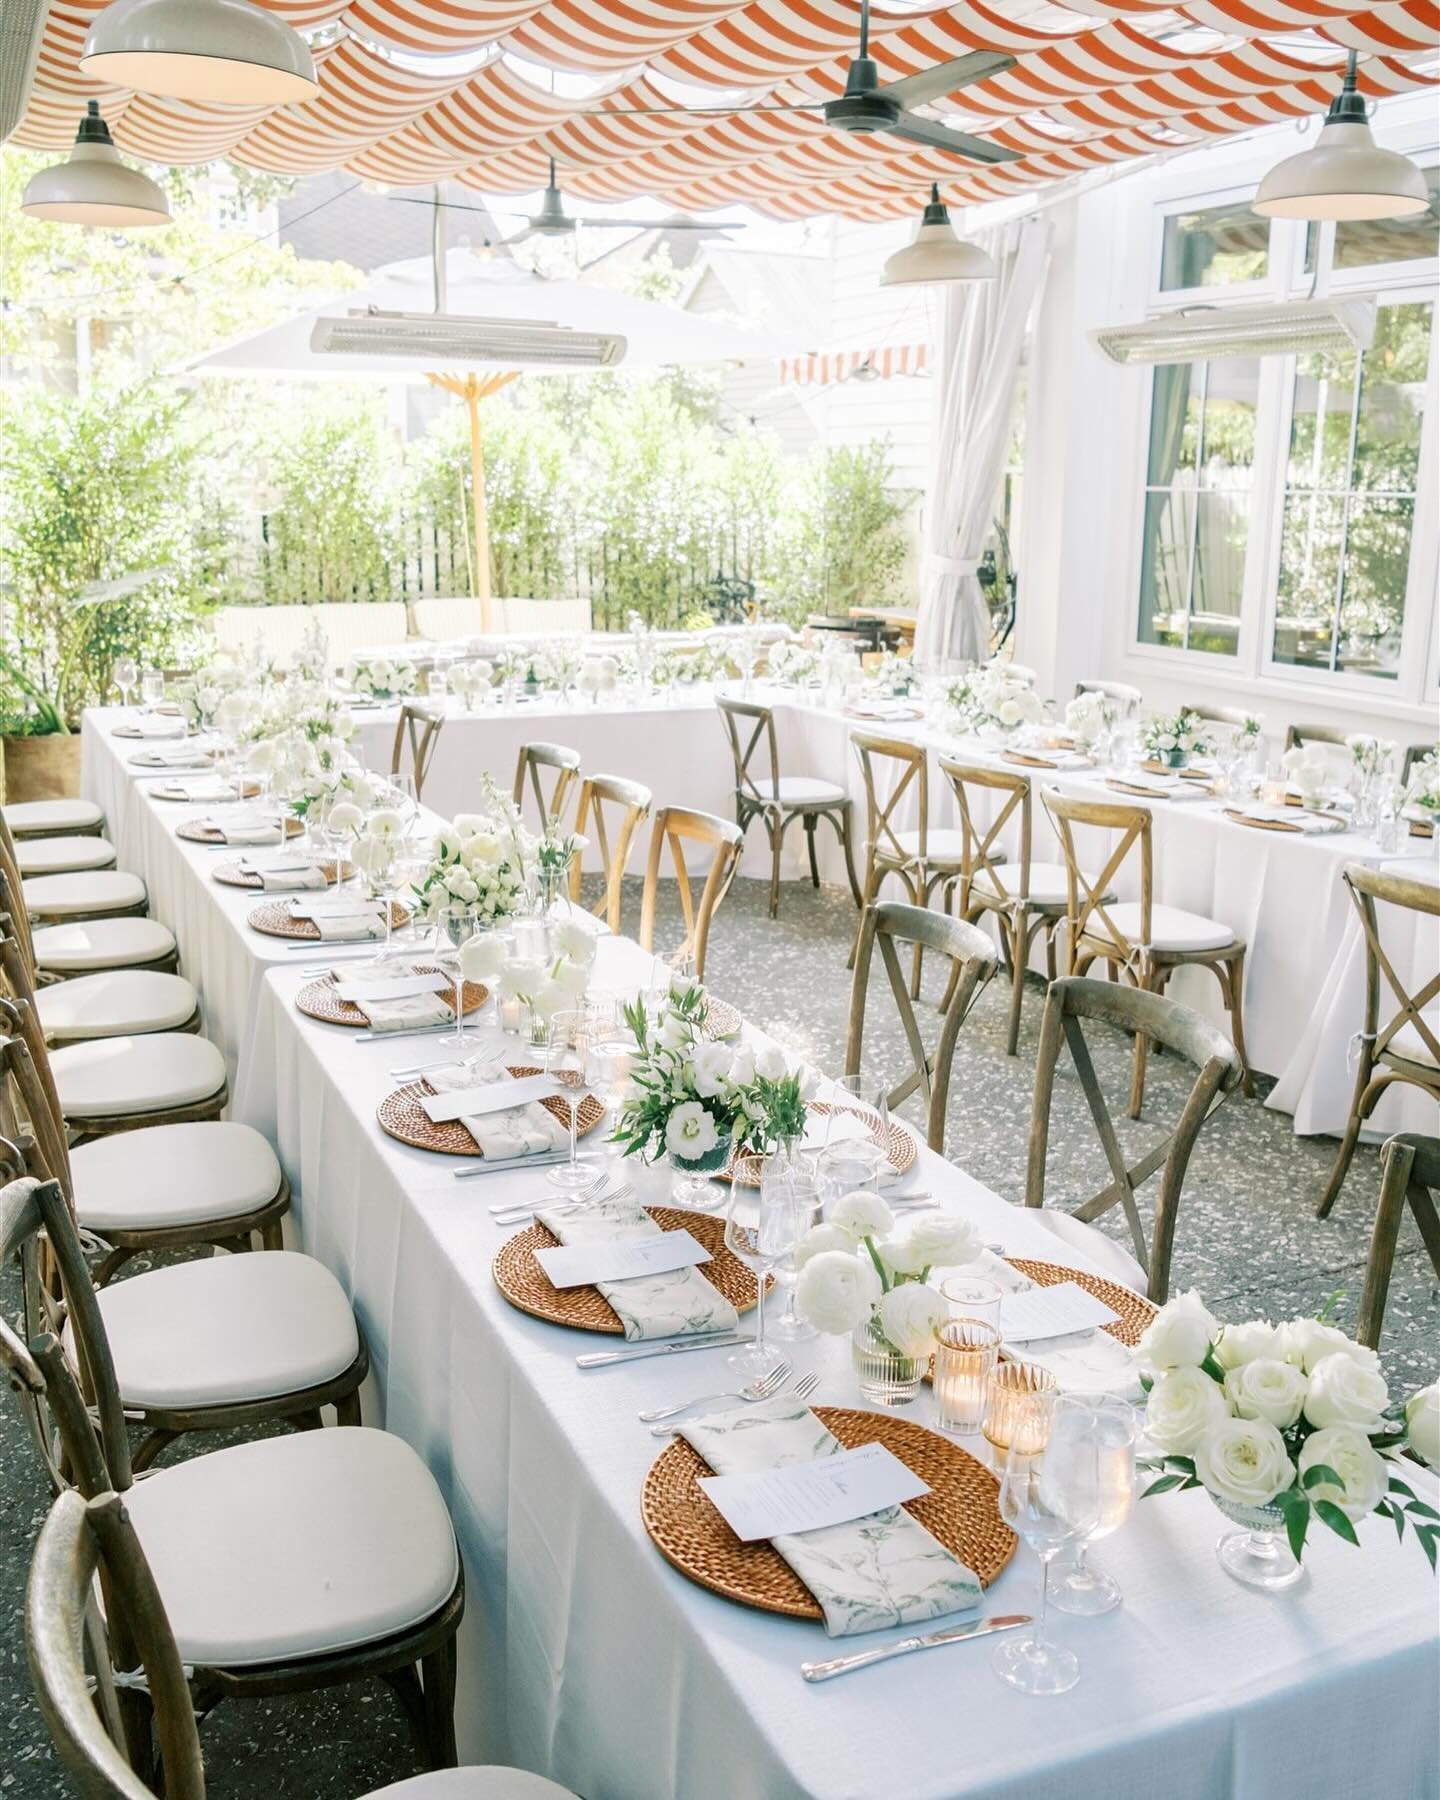 When your wedding day is giving French Riviera vibes ✨

Venue @posthouseinn 
Design @steelemagnoliaevents 
Florals @rsgeventdesigns 
Stationary @paperdaisiesstationery